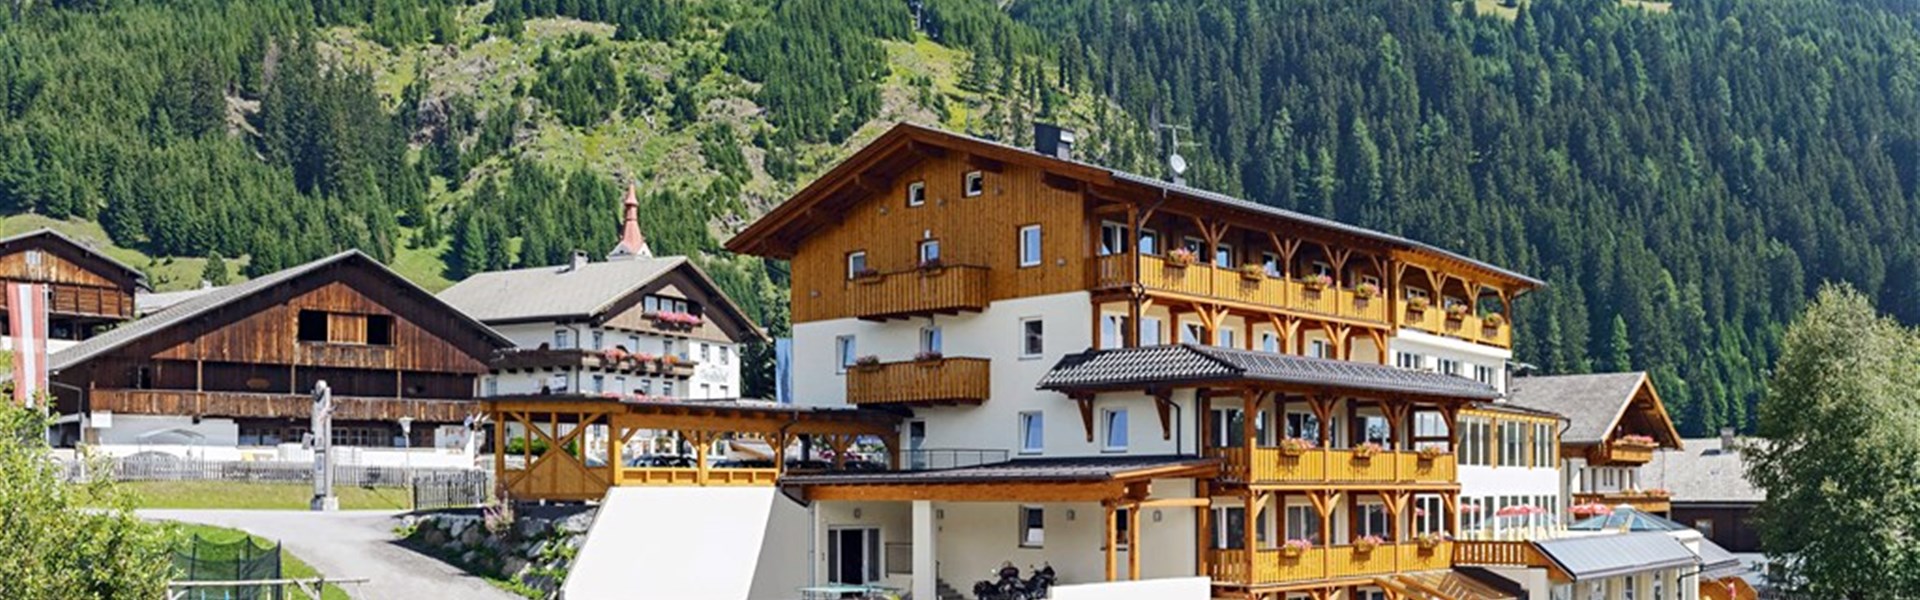 Marco Polo - Hotel Gasthof Andreas - 